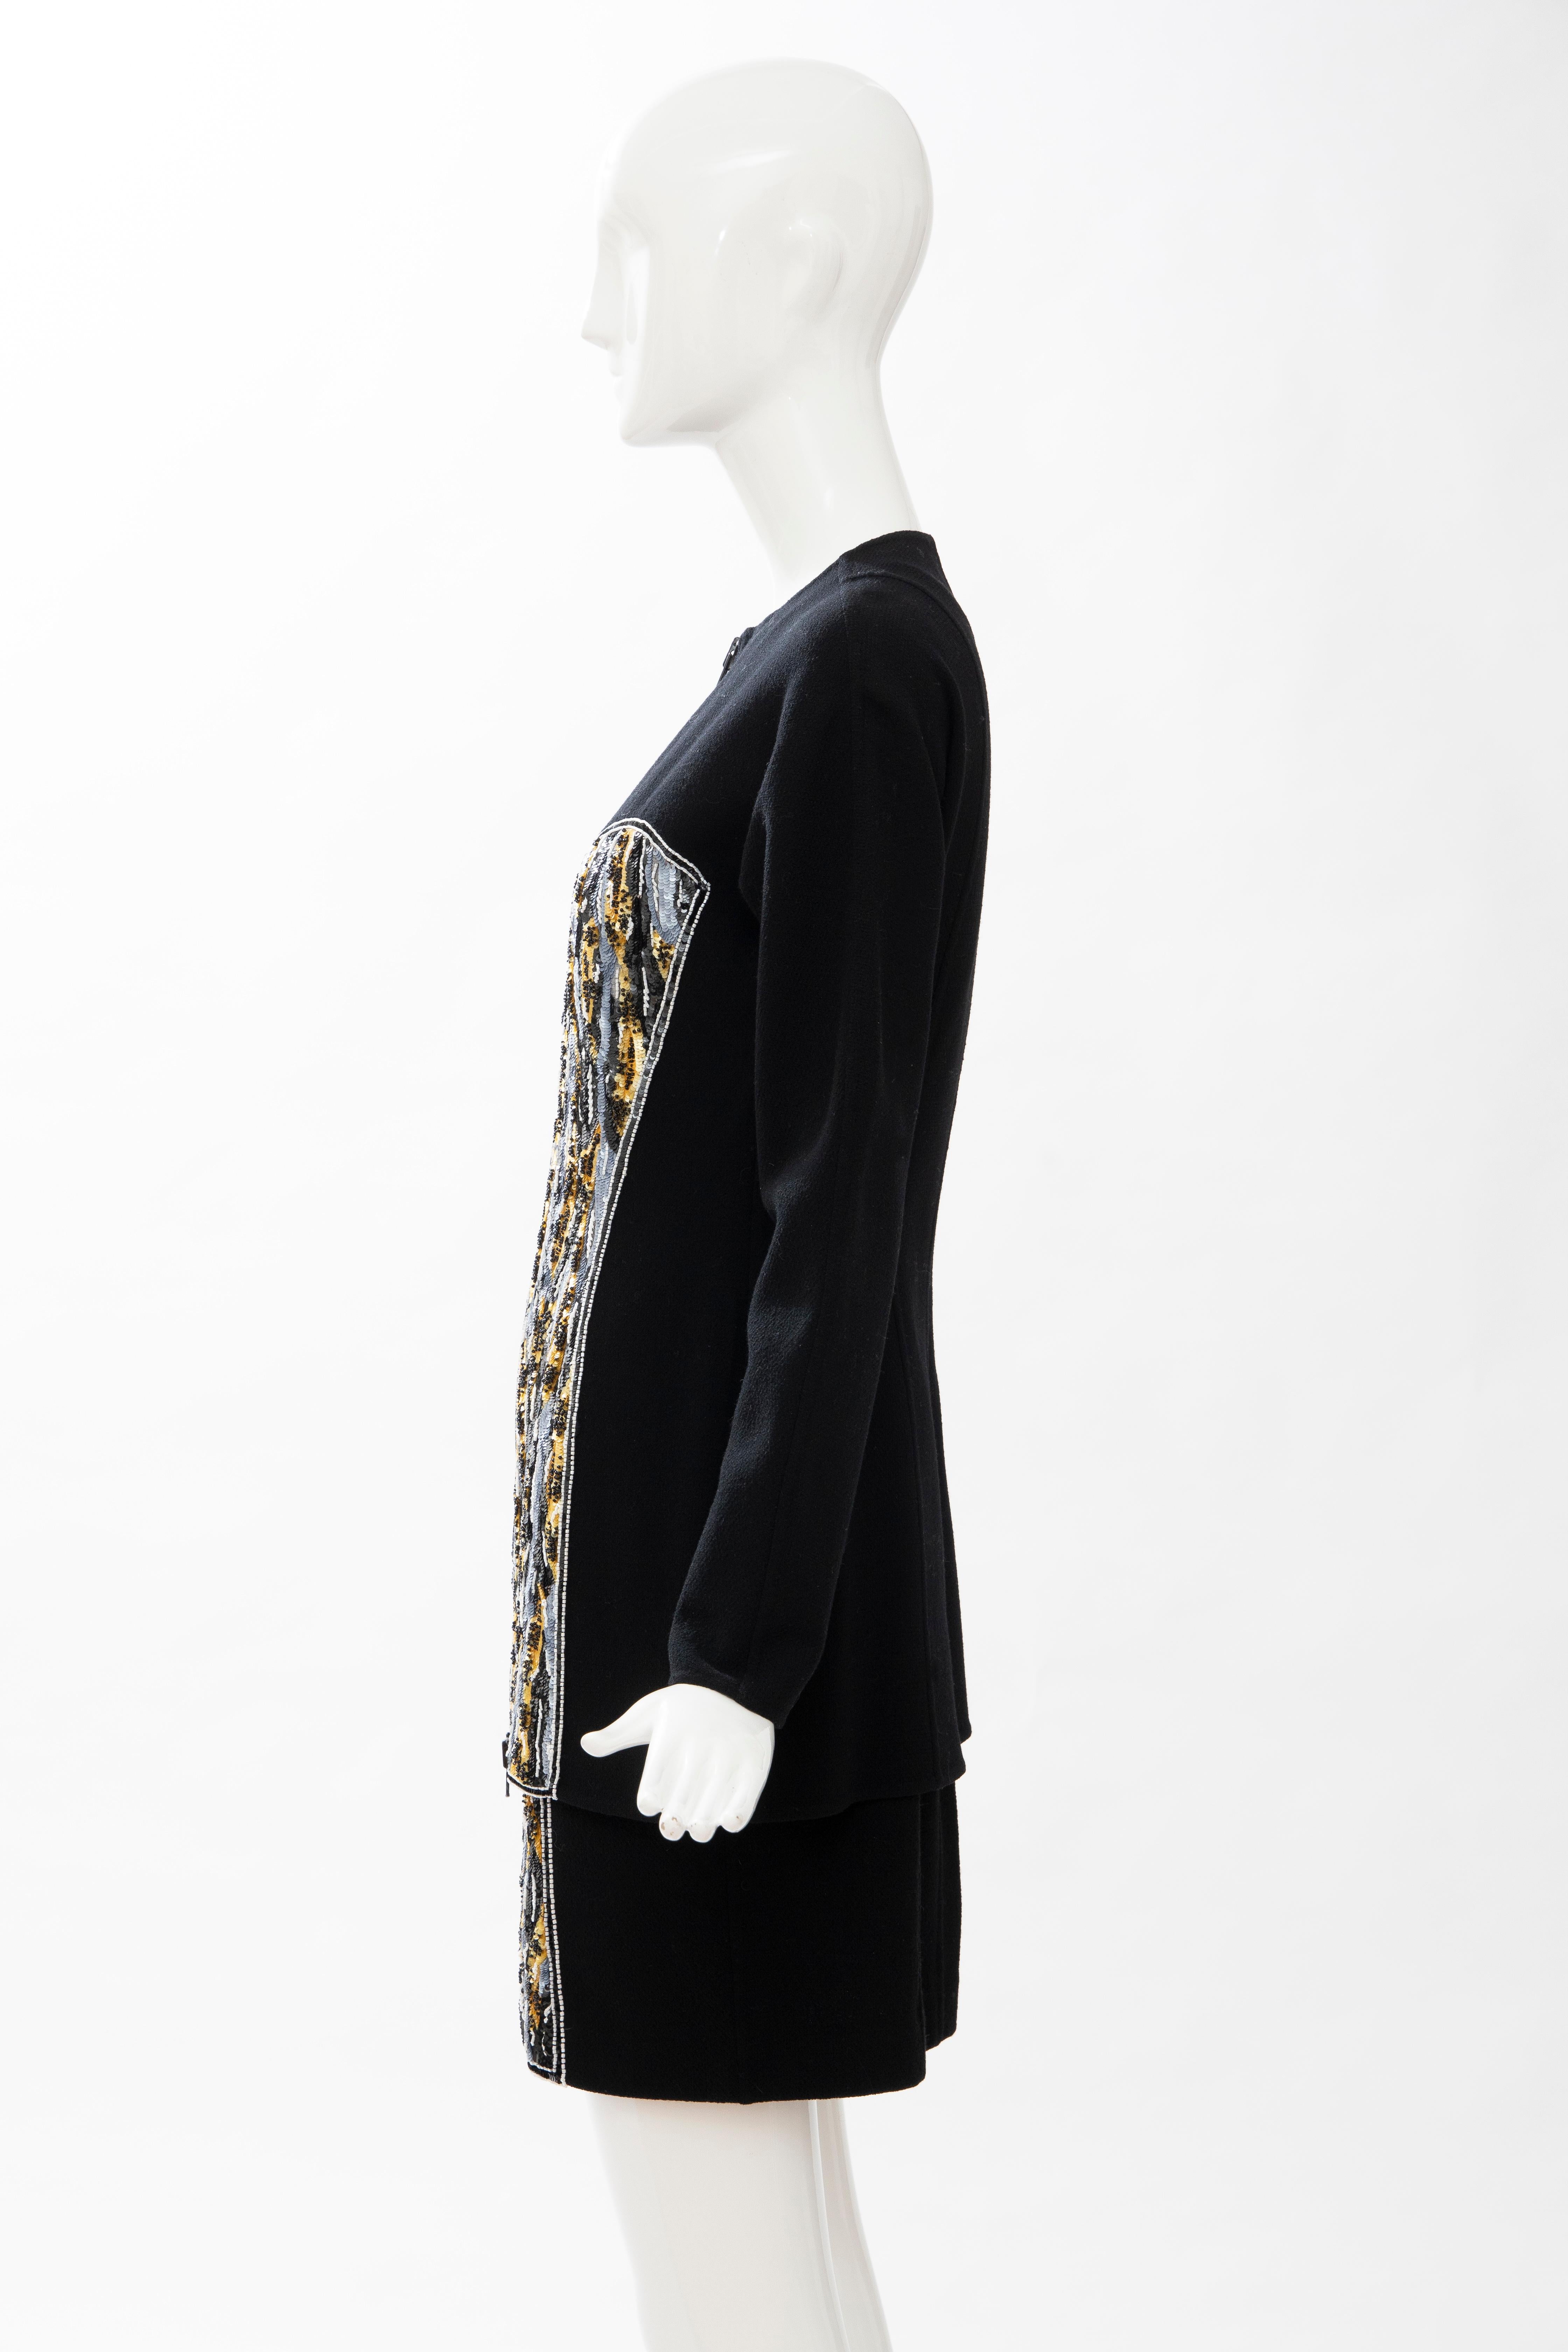 Geoffrey Beene Black Wool Crepe Embroidered Sequins Dress Ensemble, Circa 1990's For Sale 8